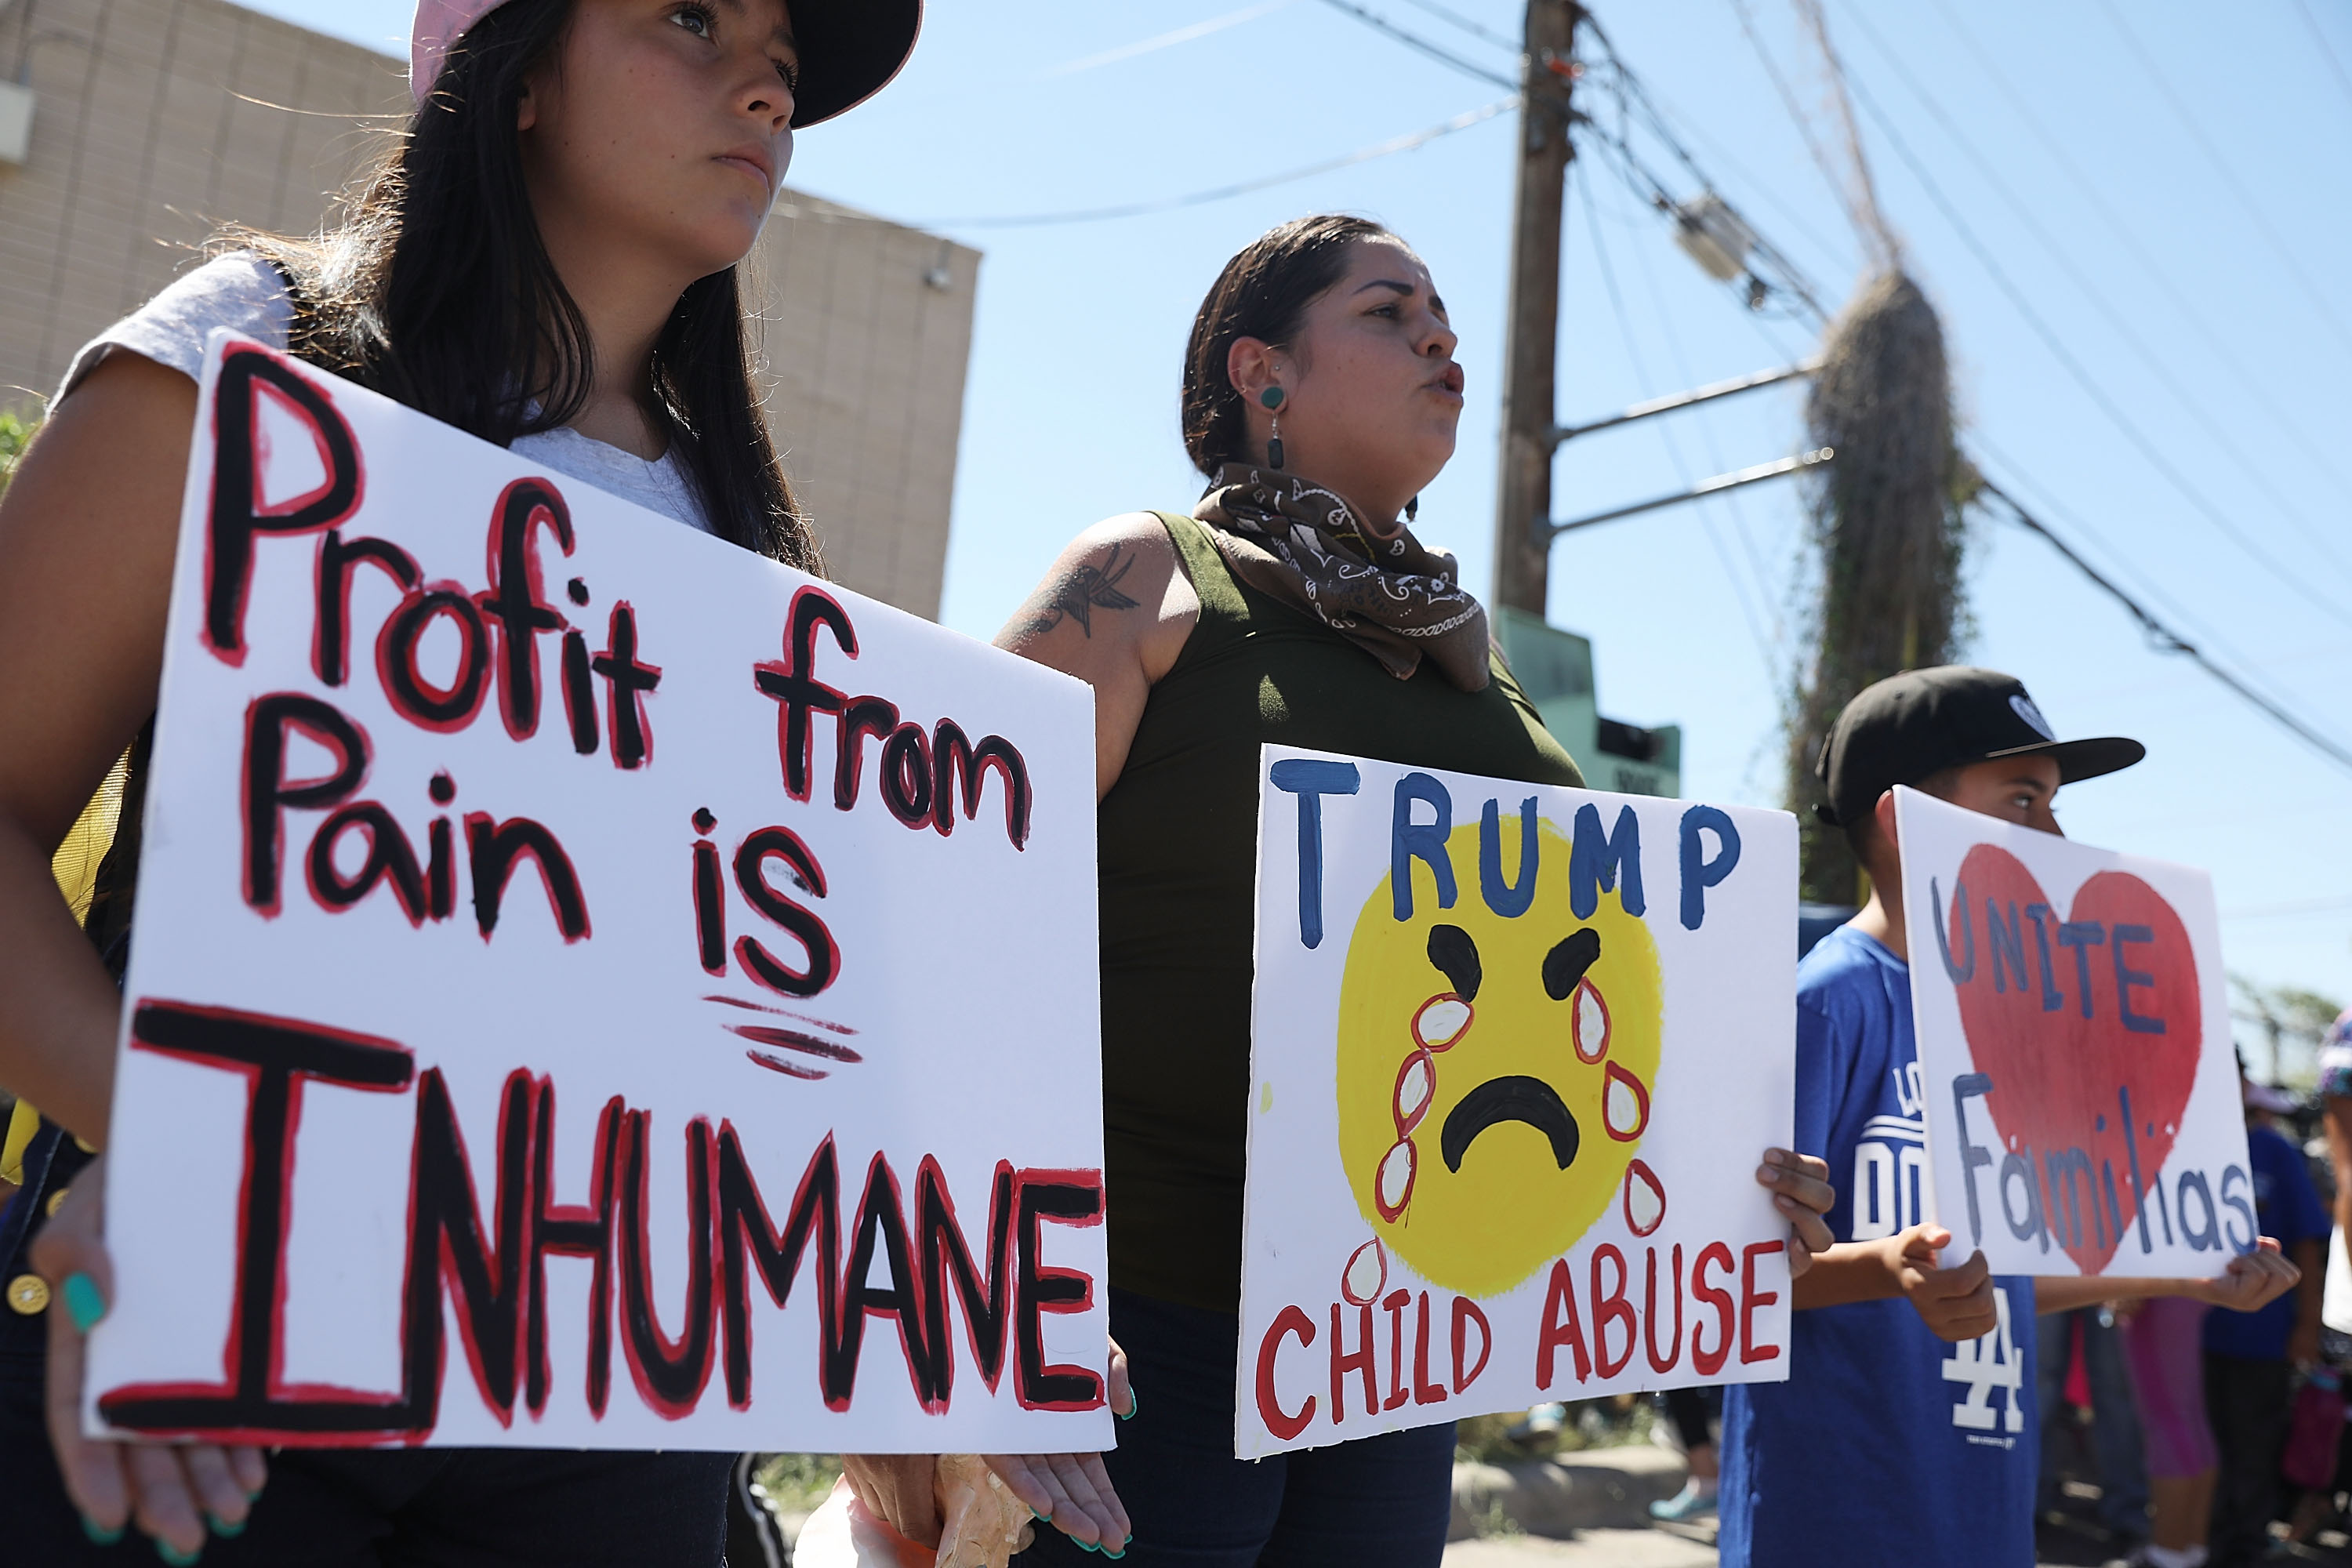 People protest the separation of children from their parents in front of the El Paso Processing Center, an immigration detention facility, at the Mexican border on June 19, 2018 in El Paso, Texas. (Photo by Joe Raedle/Getty Images)